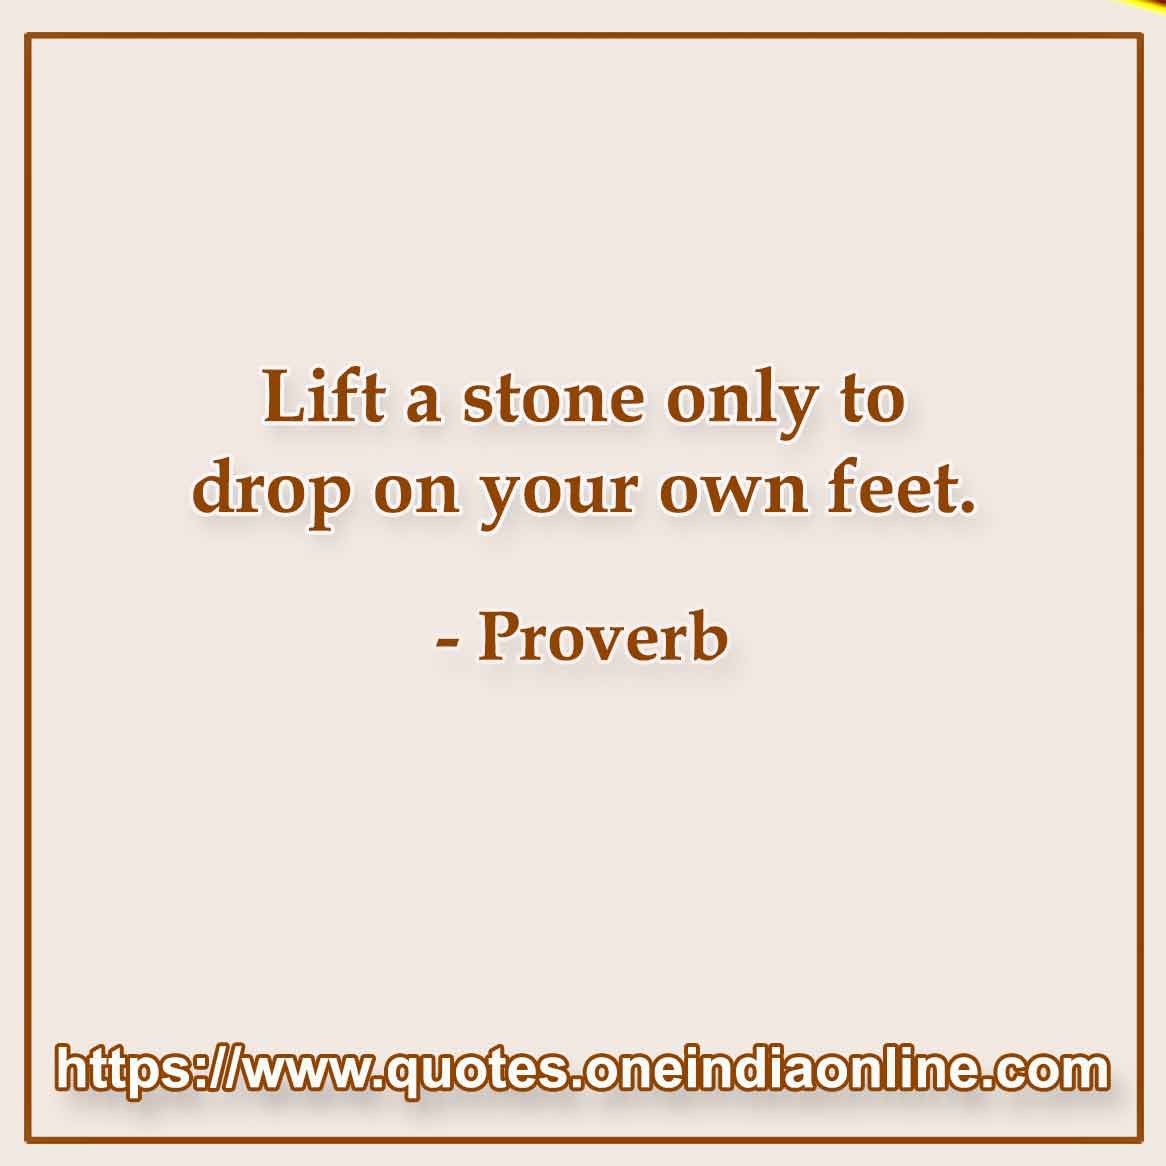 Lift a stone only to drop on your own feet.

